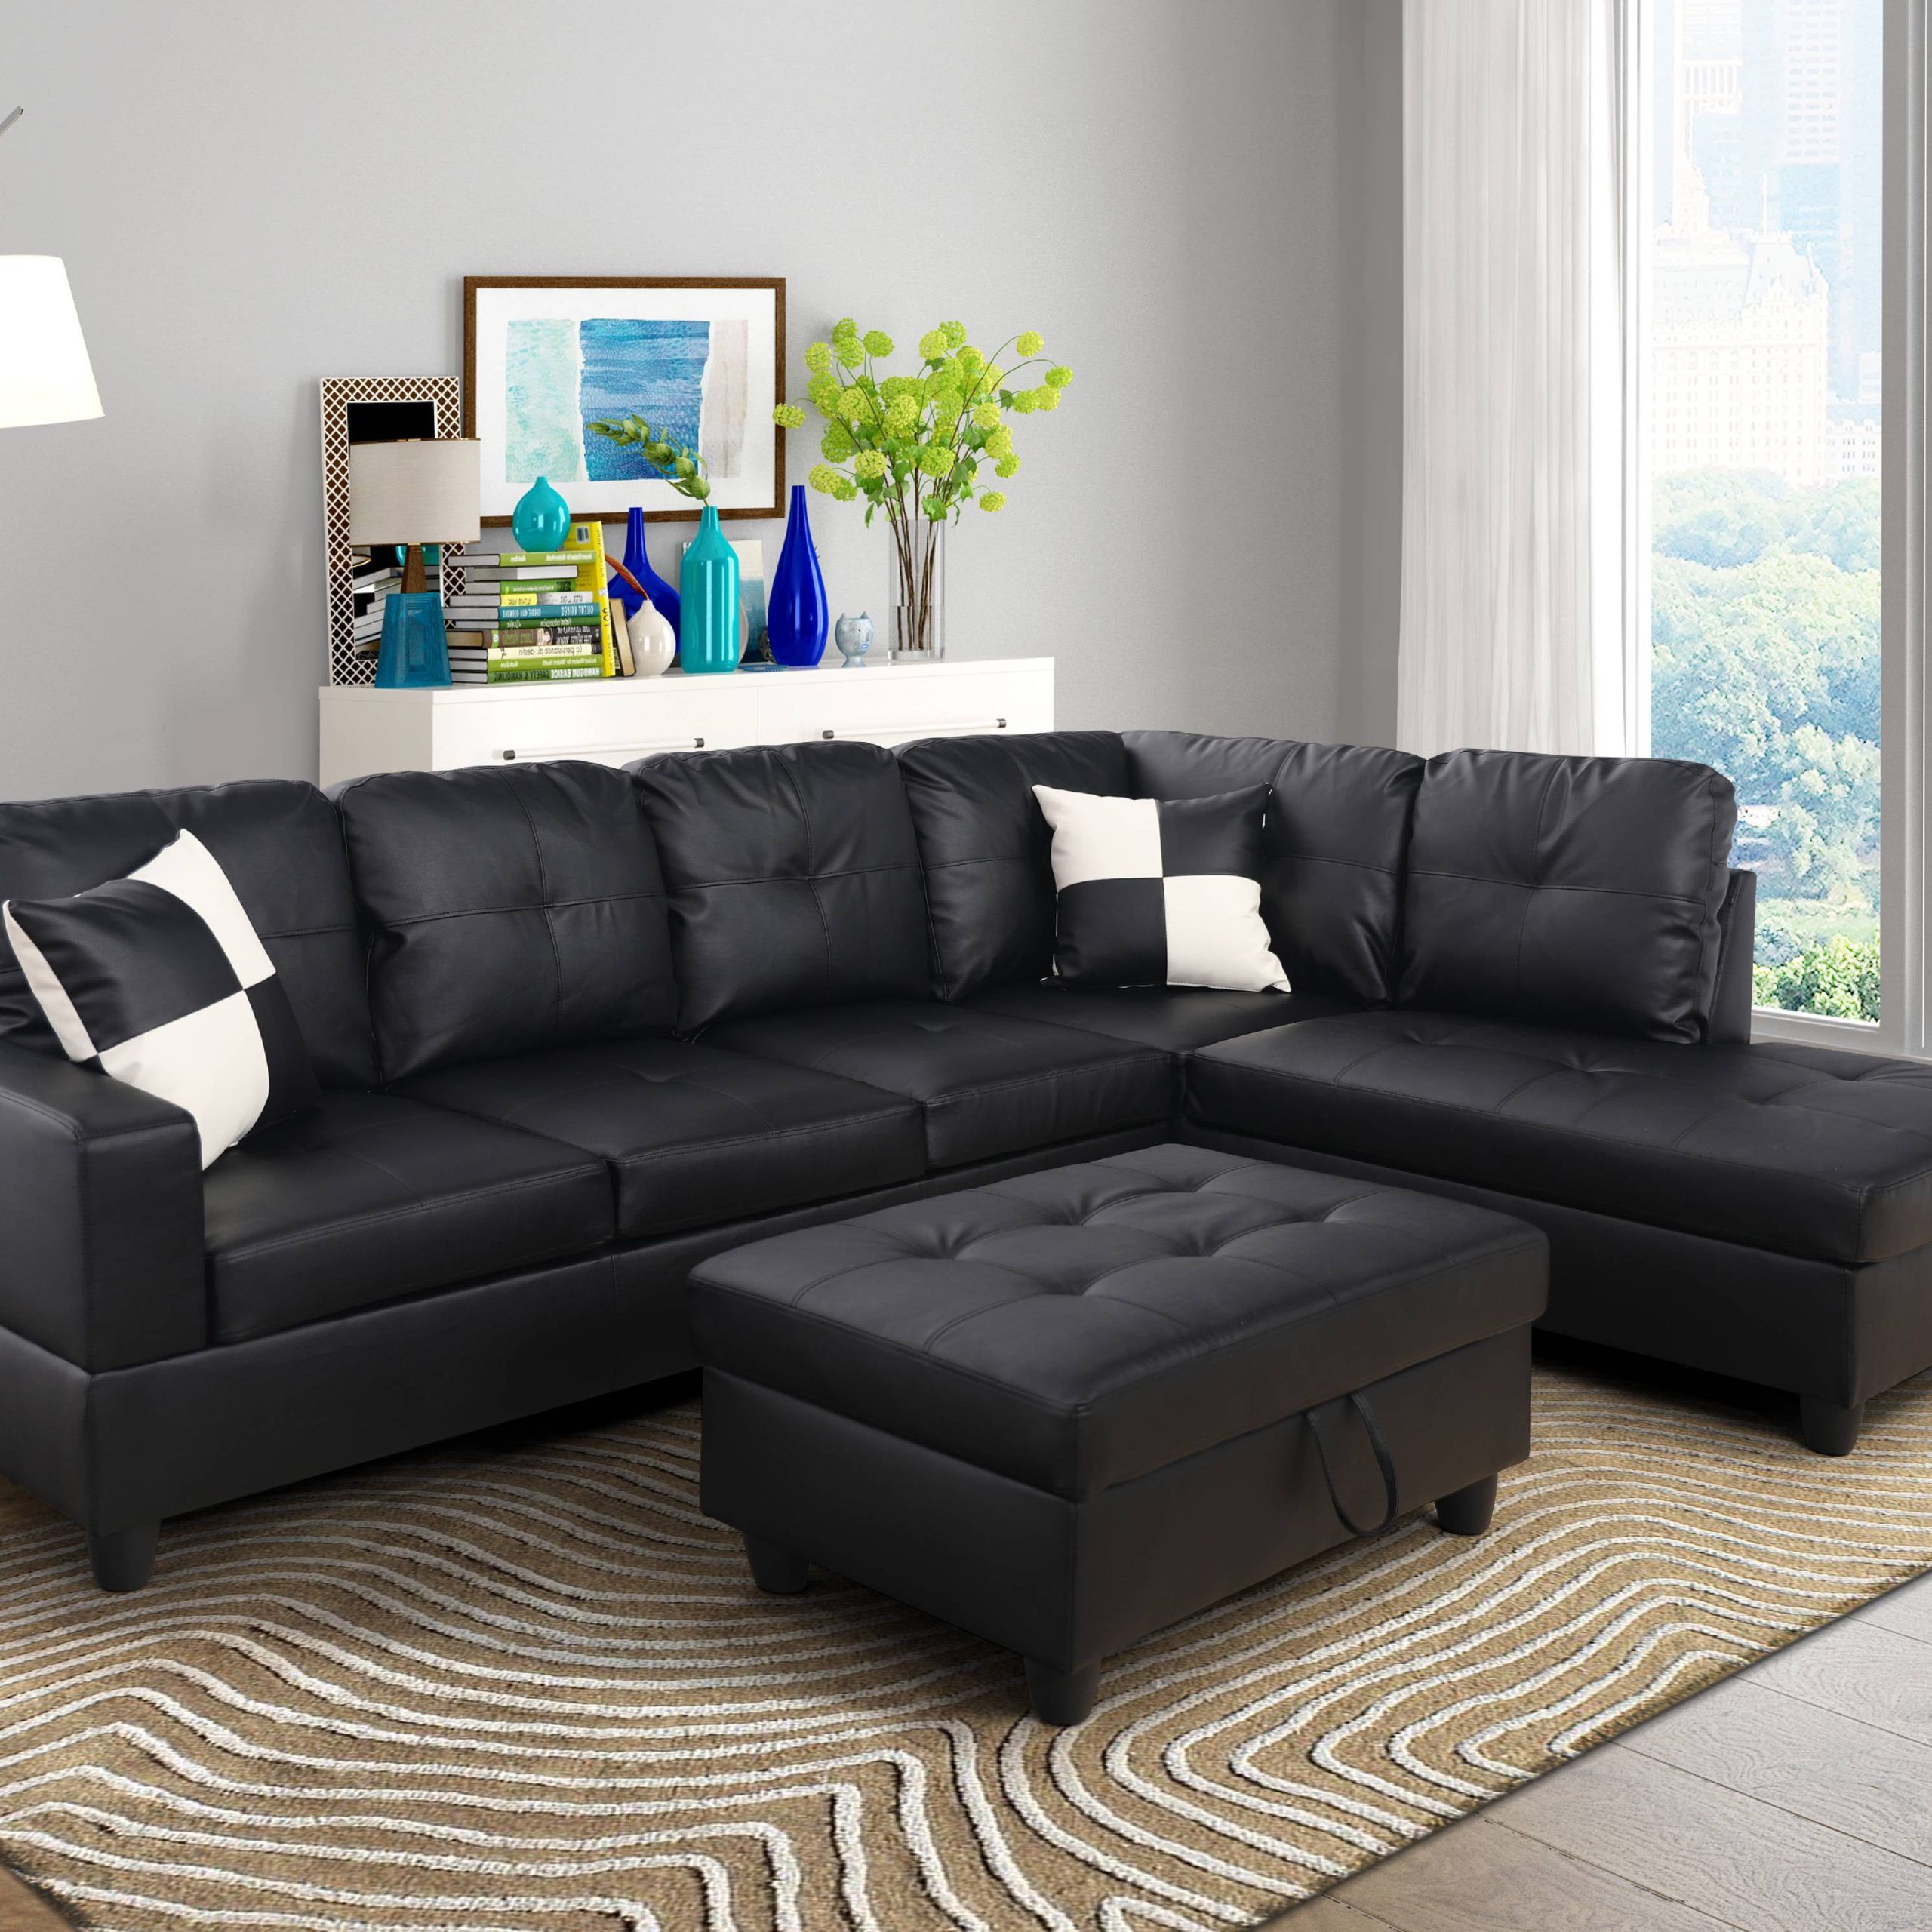 For U Furnishing Classic Black Faux Leather Sectional Sofa, Right Regarding Black Faux Suede Memory Foam Sofas (Gallery 9 of 20)